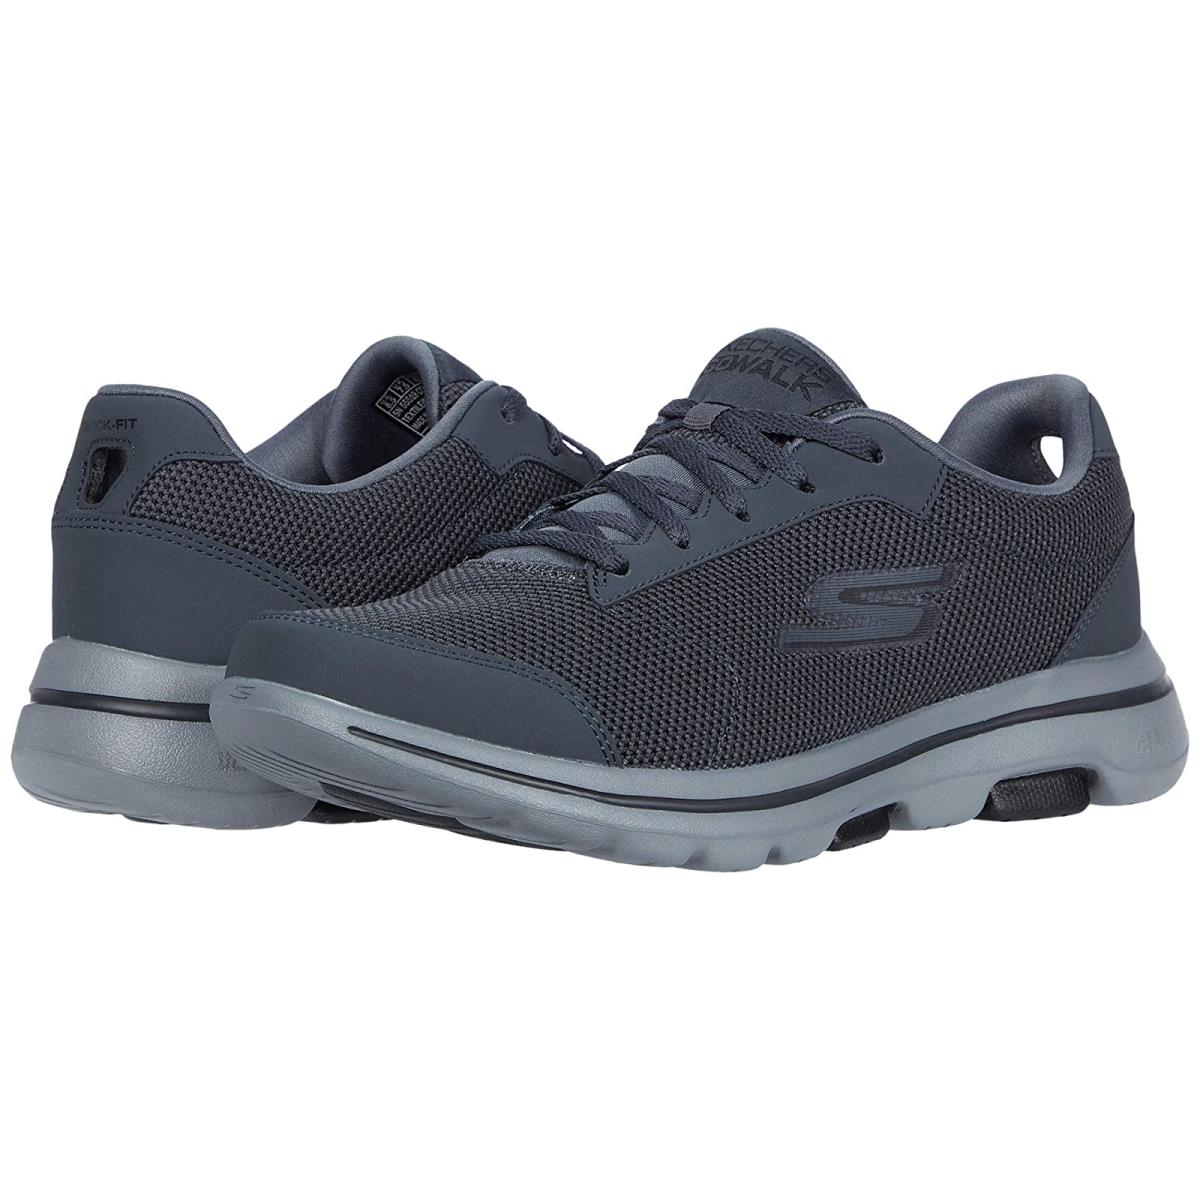 Man`s Sneakers Athletic Shoes Skechers Performance Go Walk 5 - Demitass Charcoal/Black